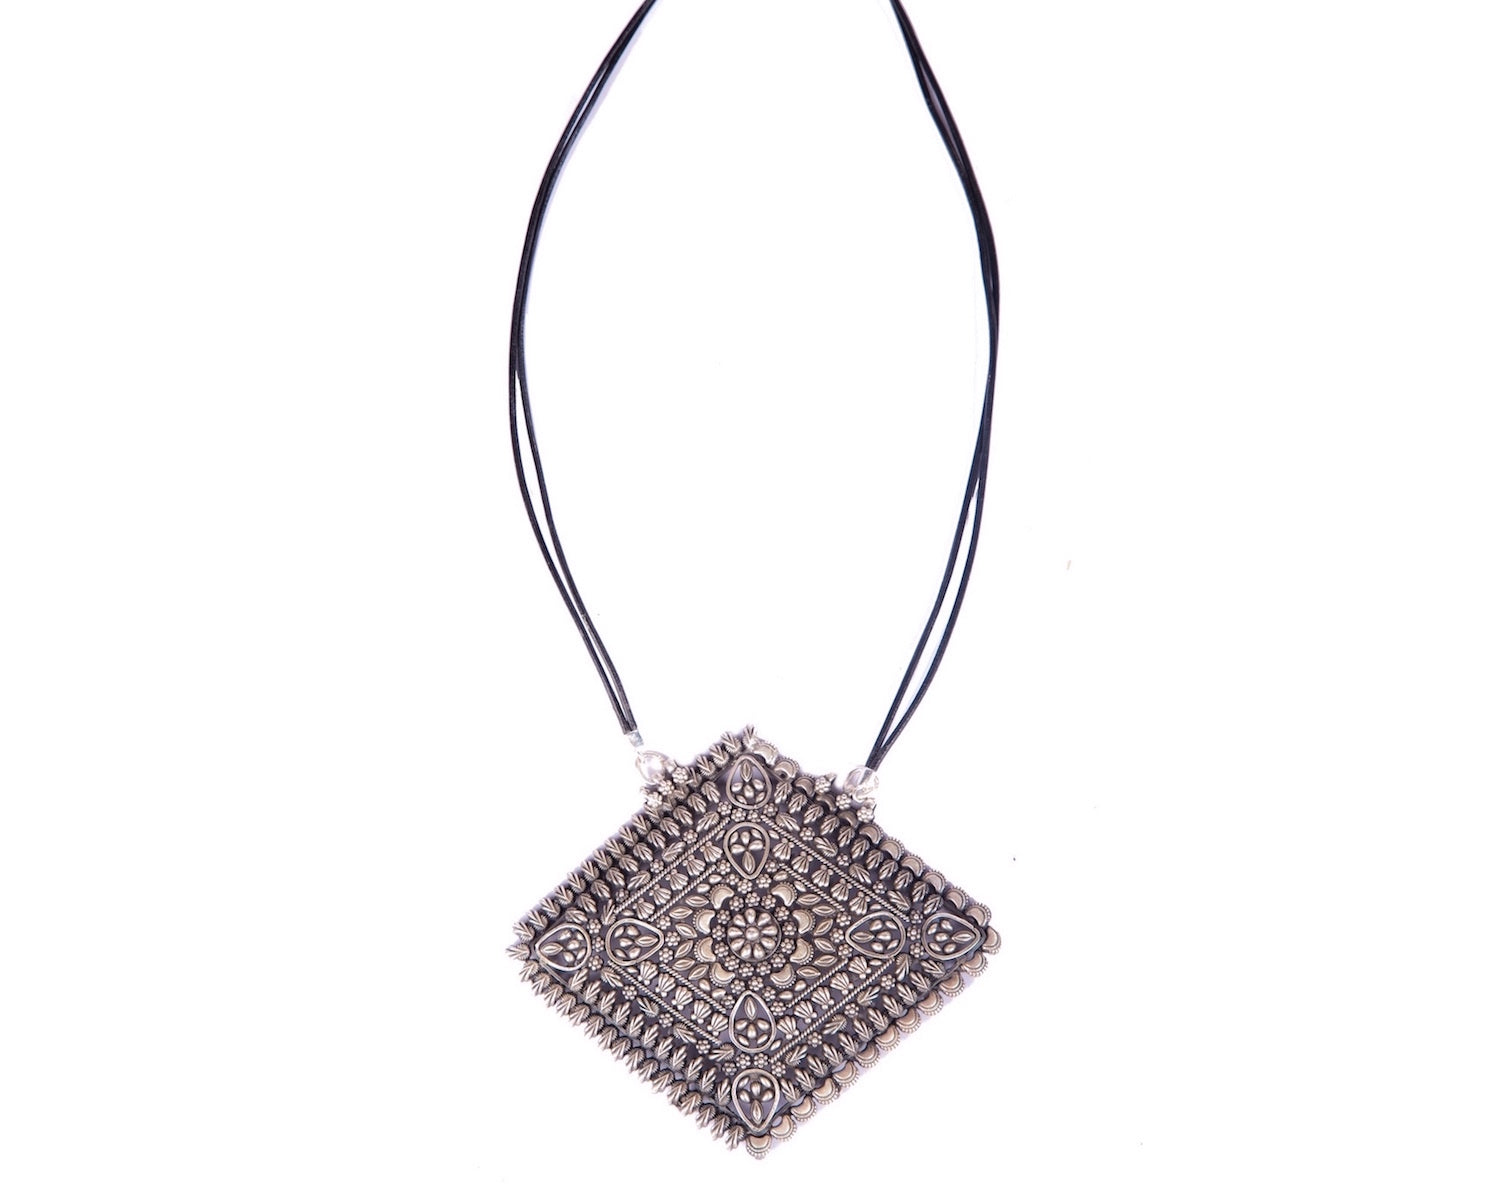 Rhombus shaped pendant strung in twin leather cords